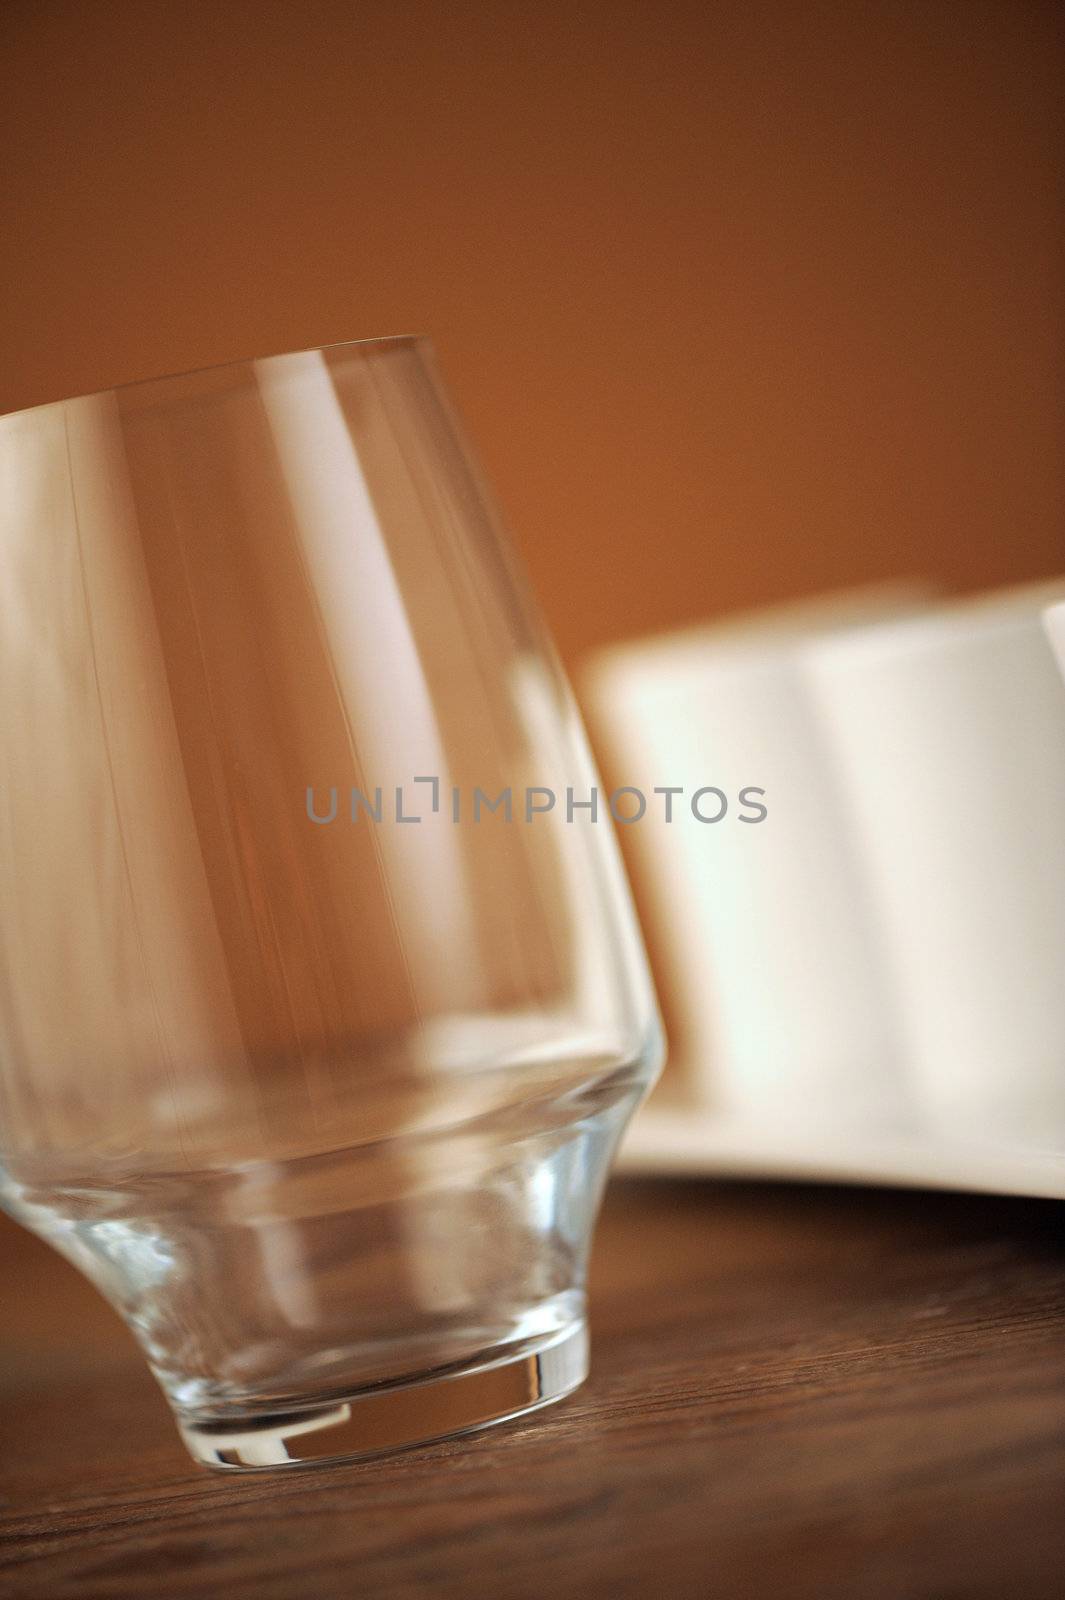 glass on table, close up, shallow dof